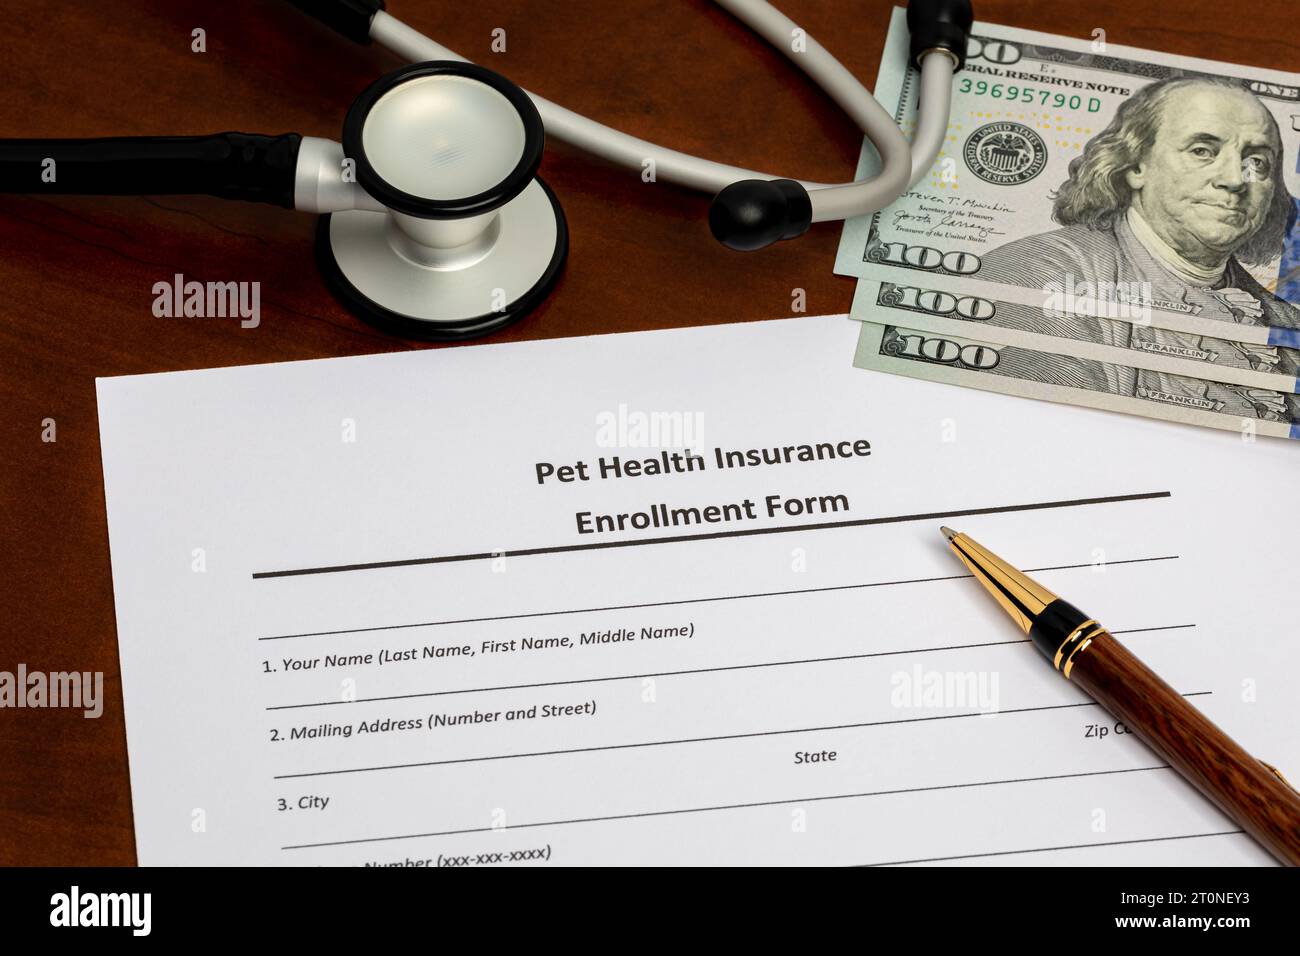 Pet health insurance form with stethoscope and cash money. Pet care, veterinarian and medical expenses. Stock Photo